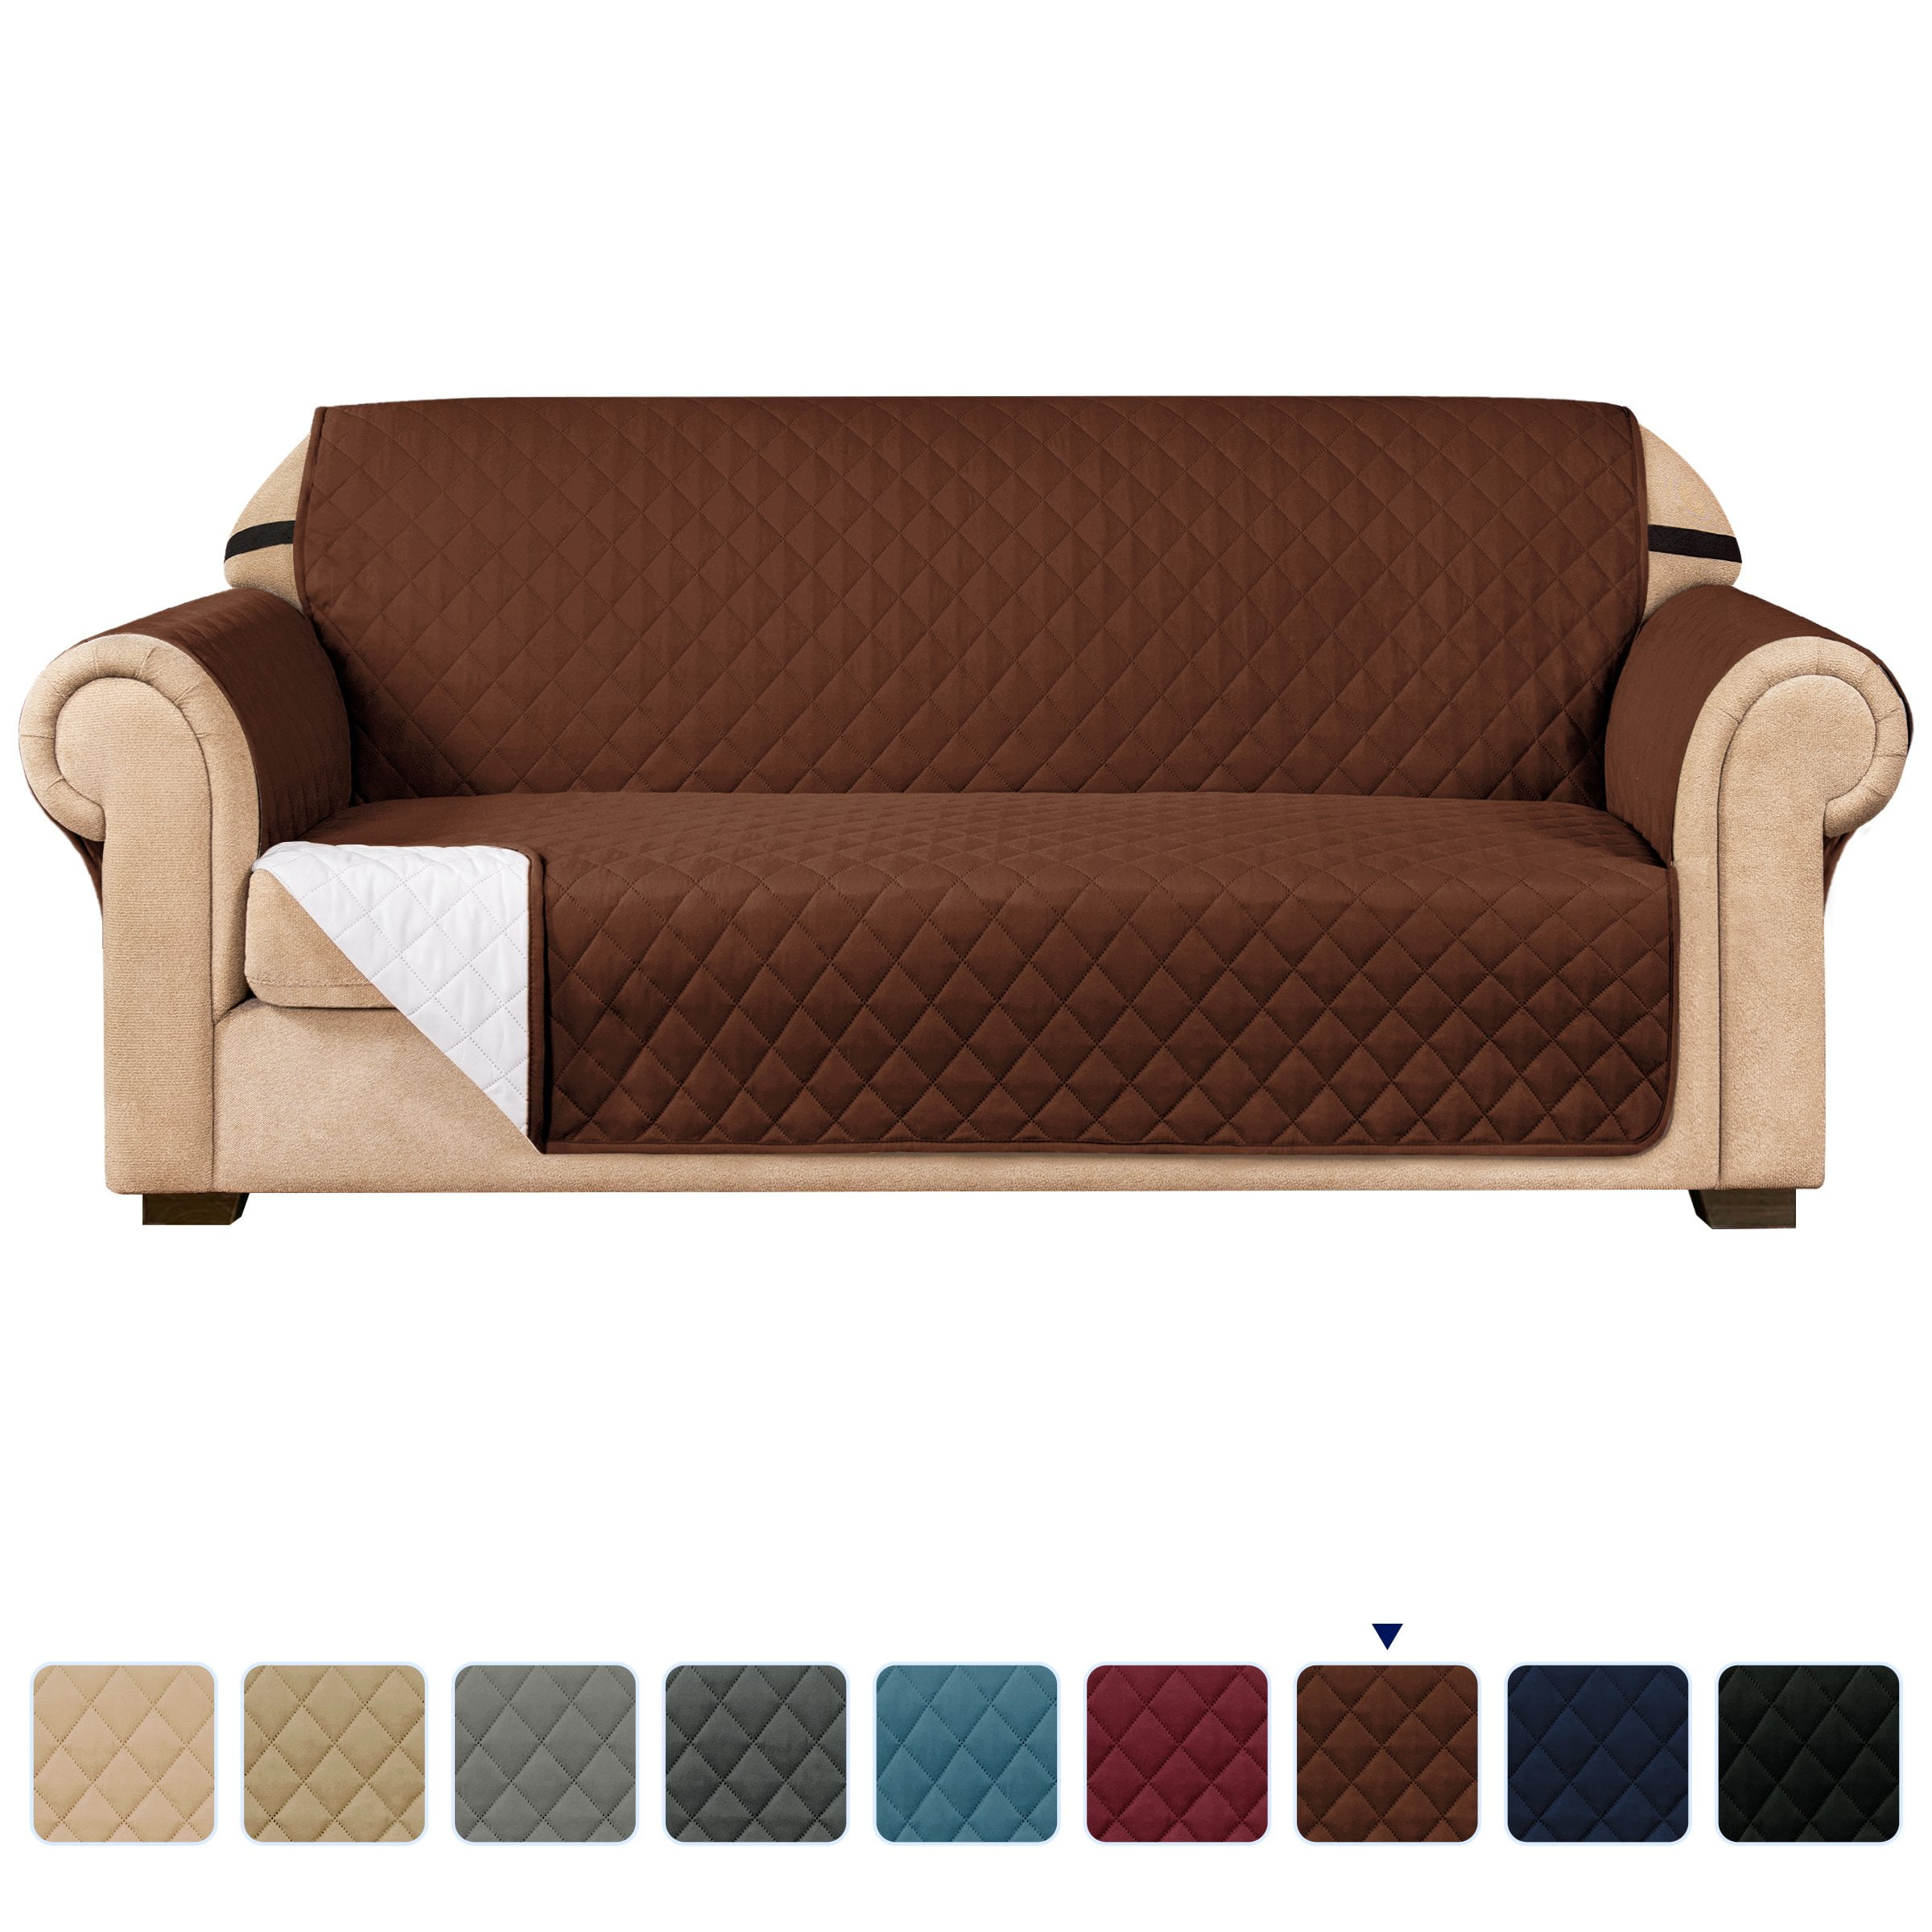 Details about   Easy-Going Sofa Slipcover Reversible Sofa Cover Water Resistant Couch Cover Furn 